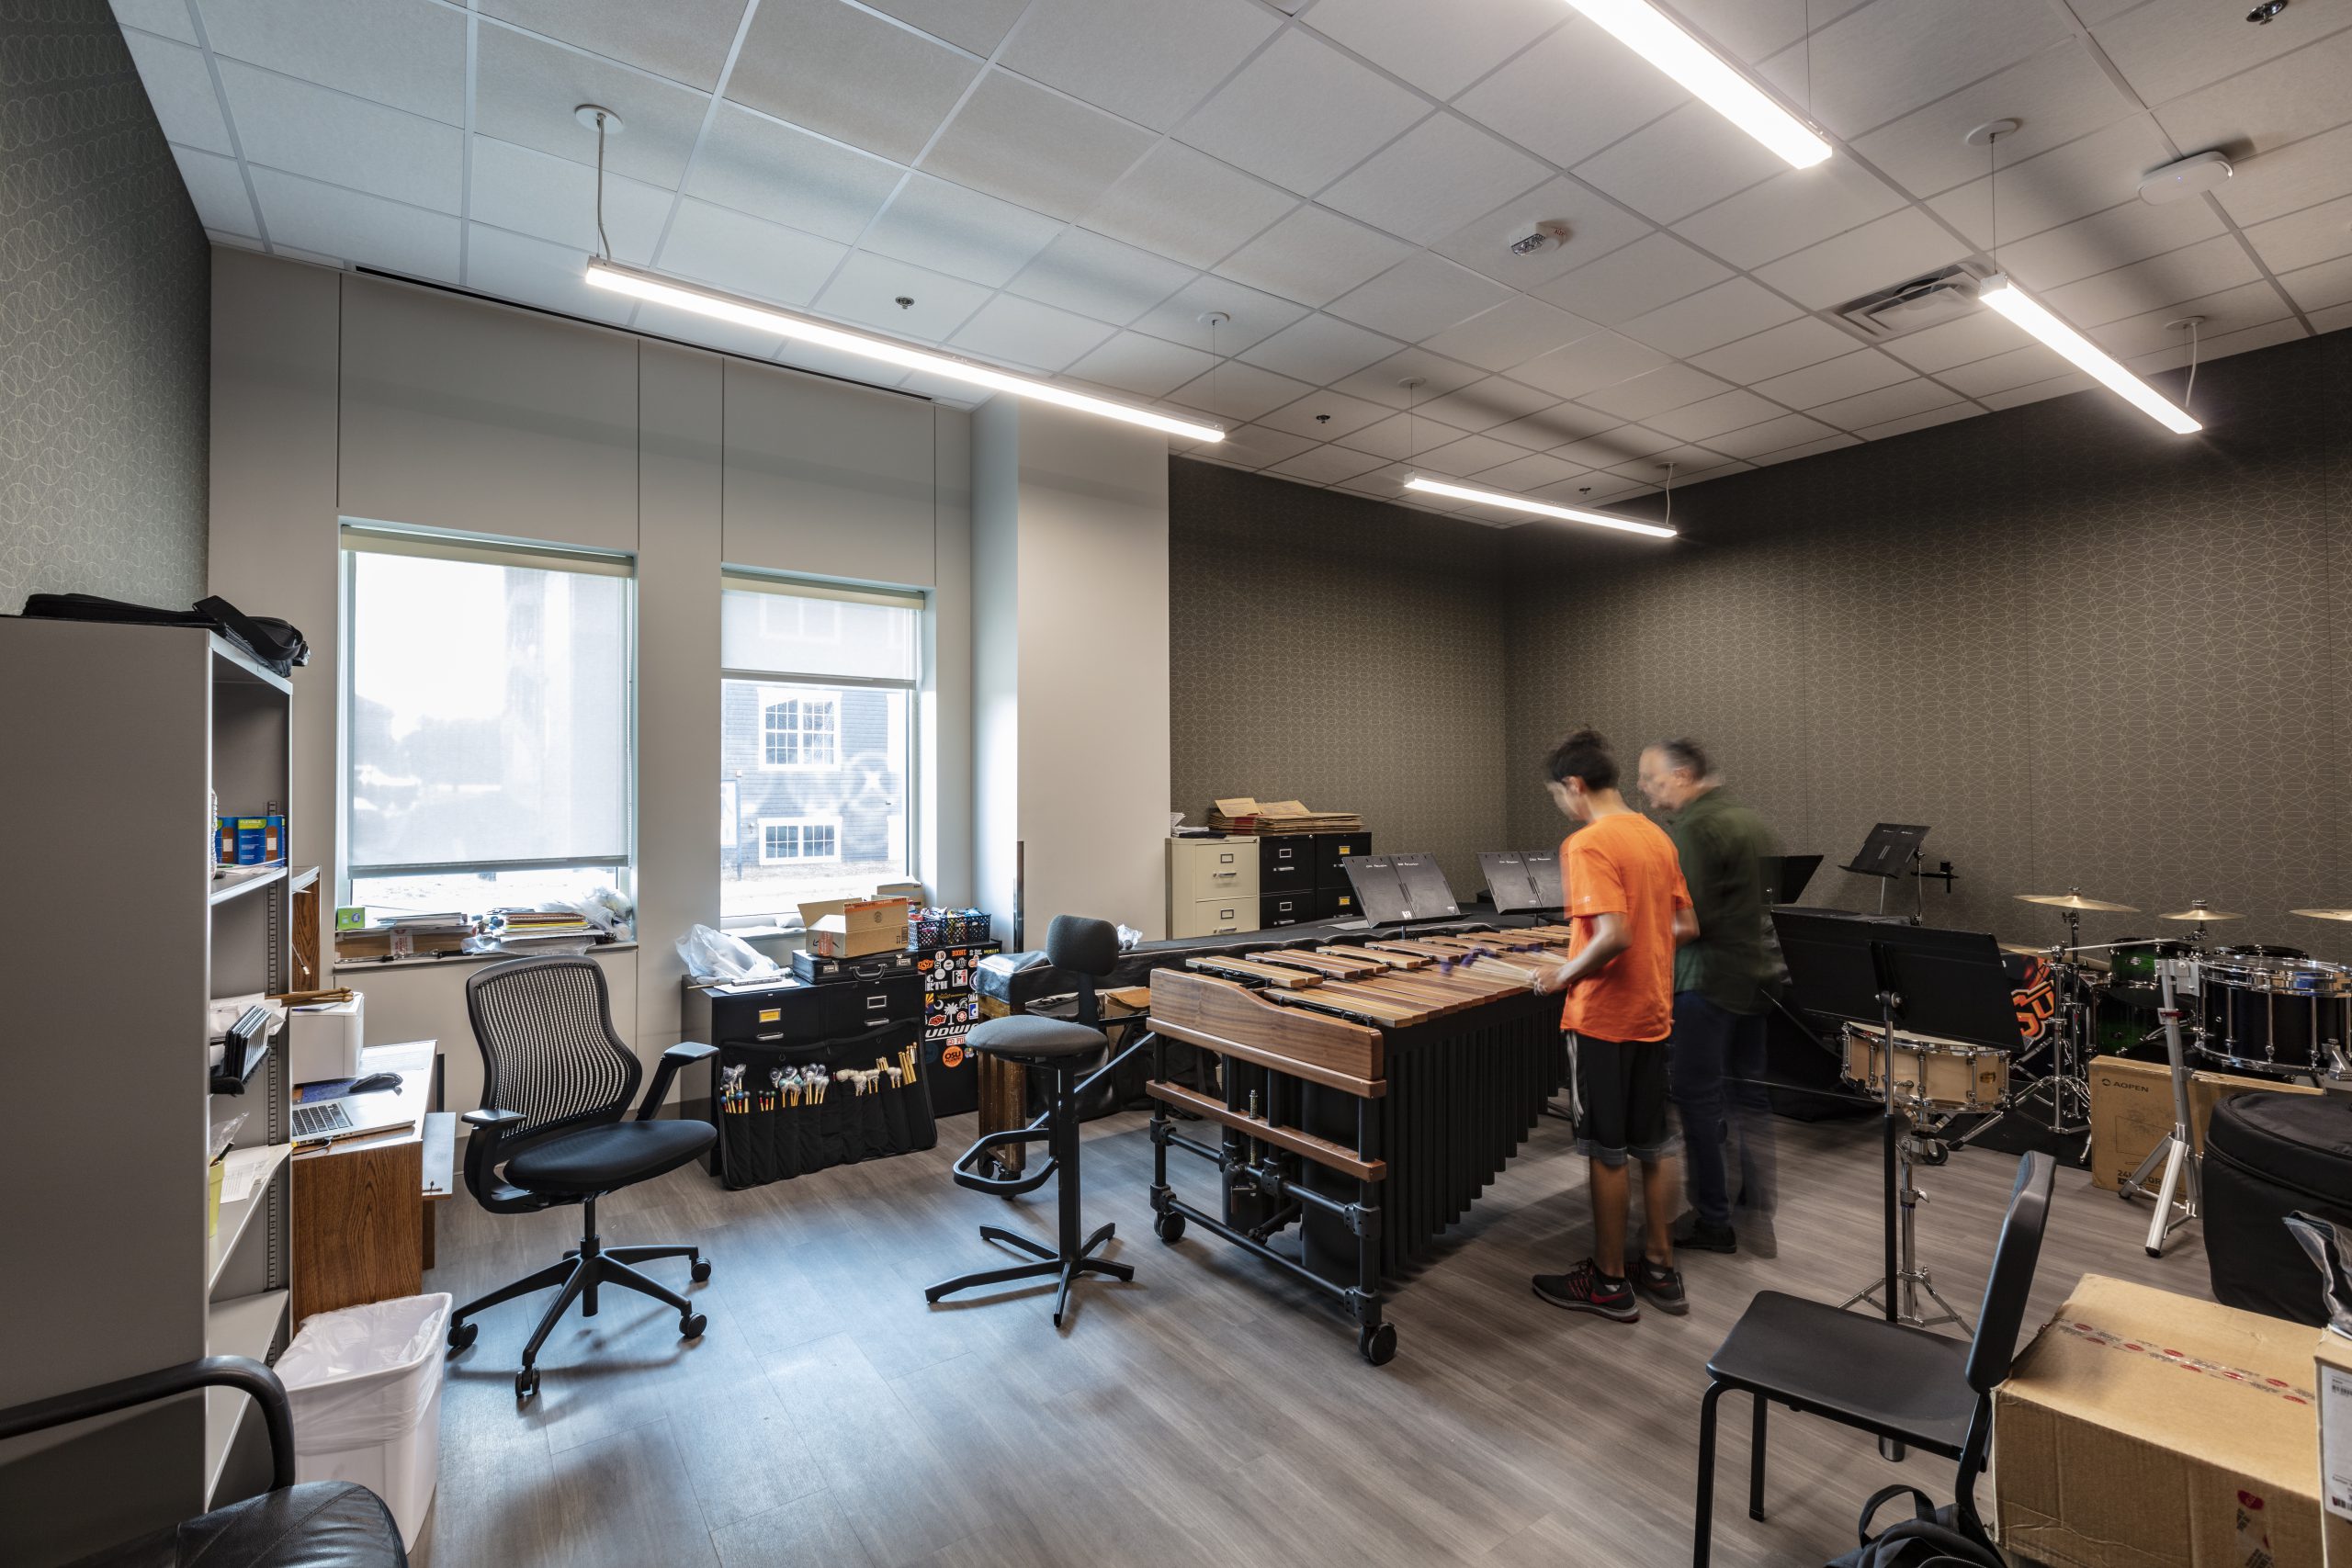 An instructor teaches a student in one of the OSU Greenwood School of Music instrument rooms